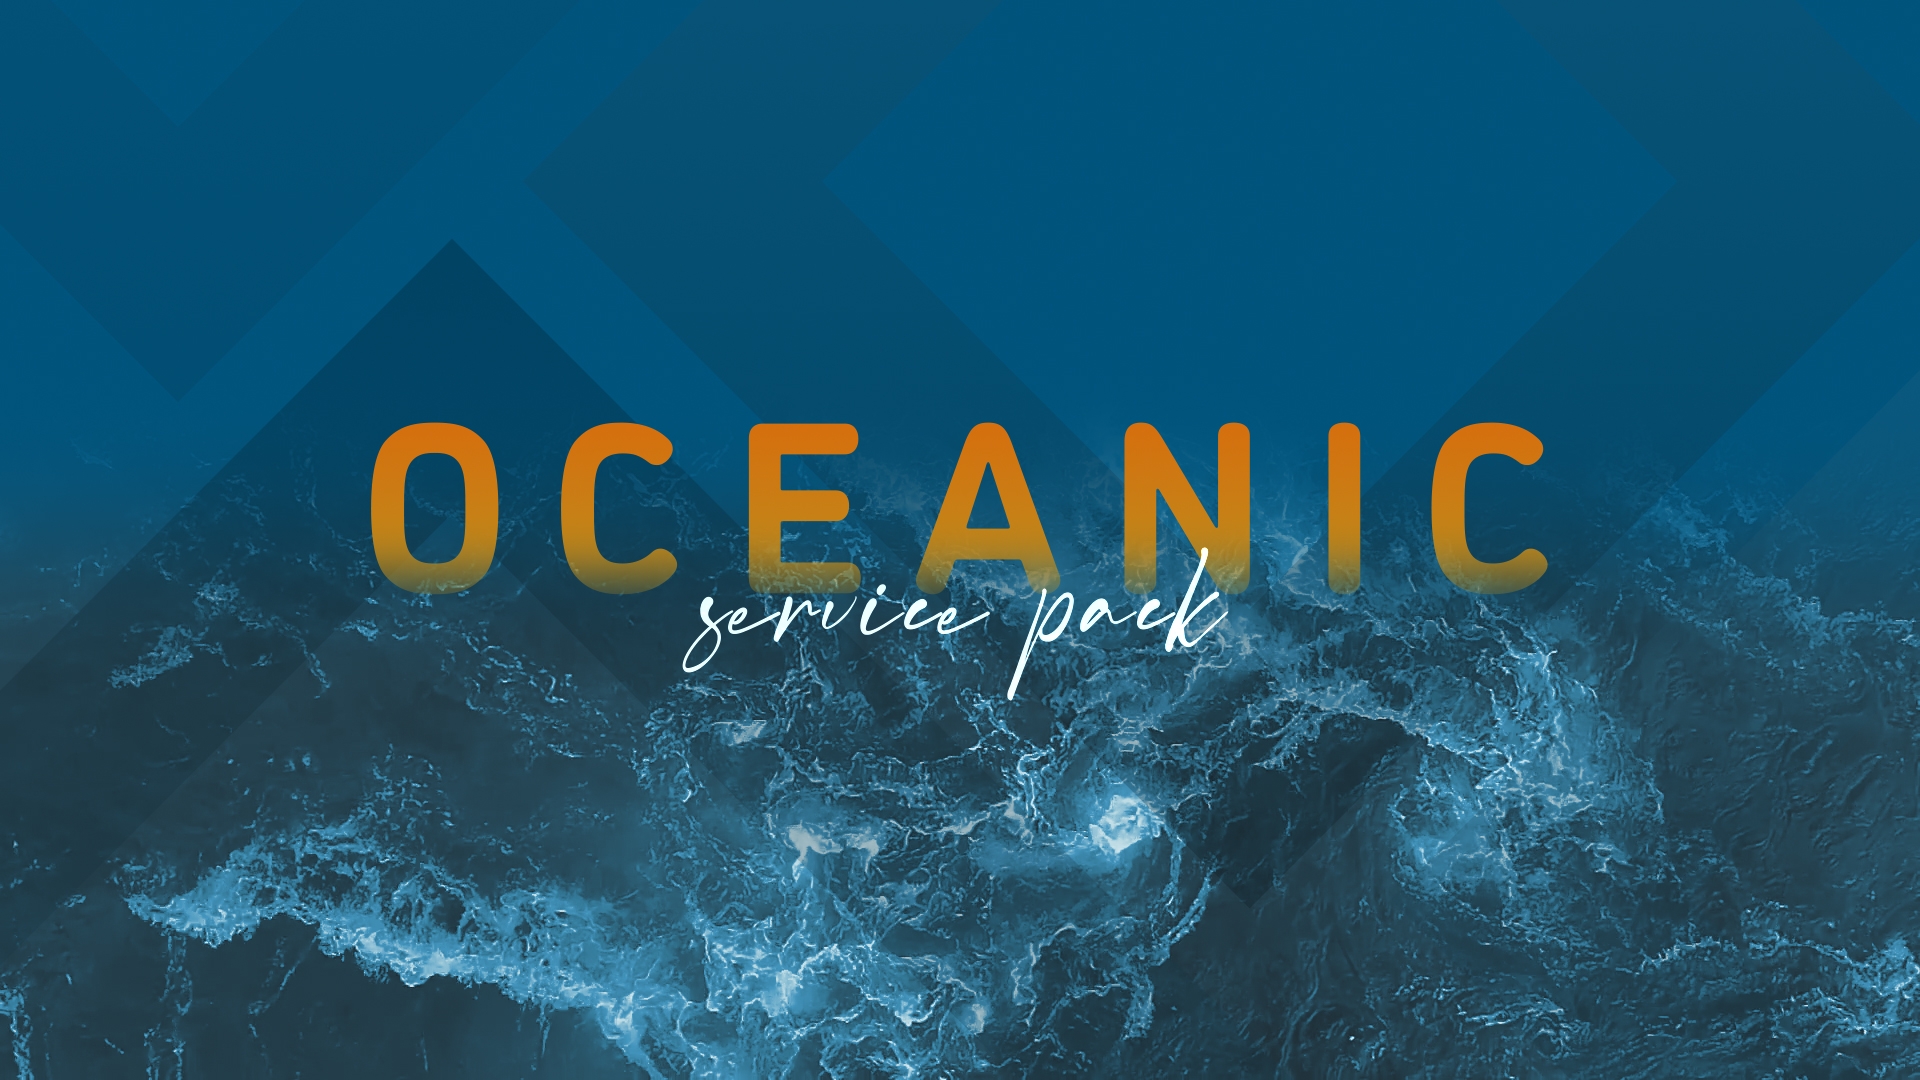 Oceanic Service Pack